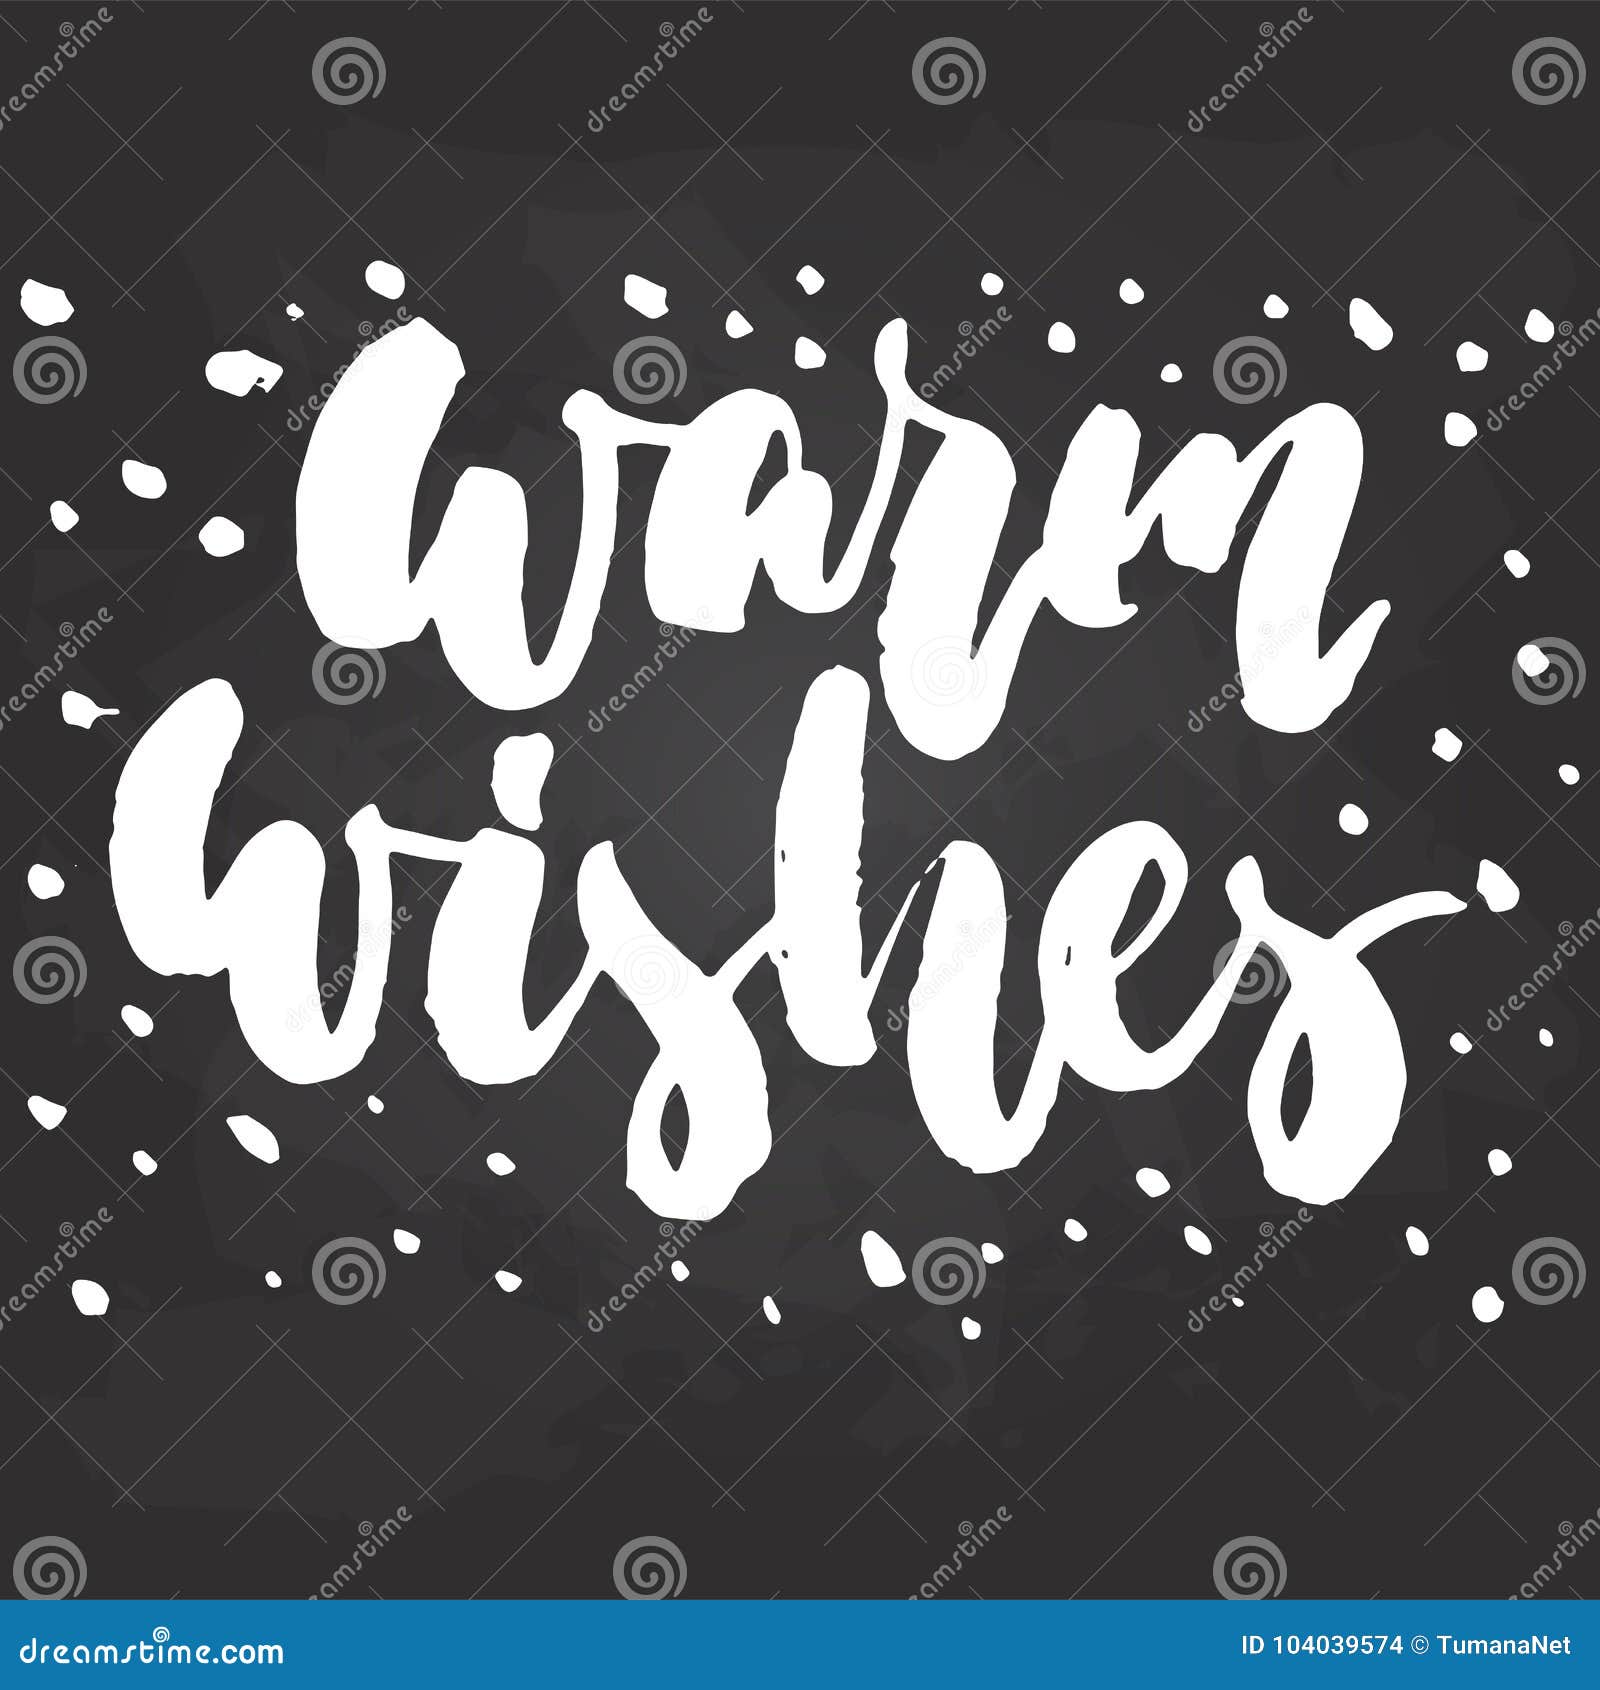 Warm Wishes - Hand Drawn Christmas and New Year Winter Holidays ...